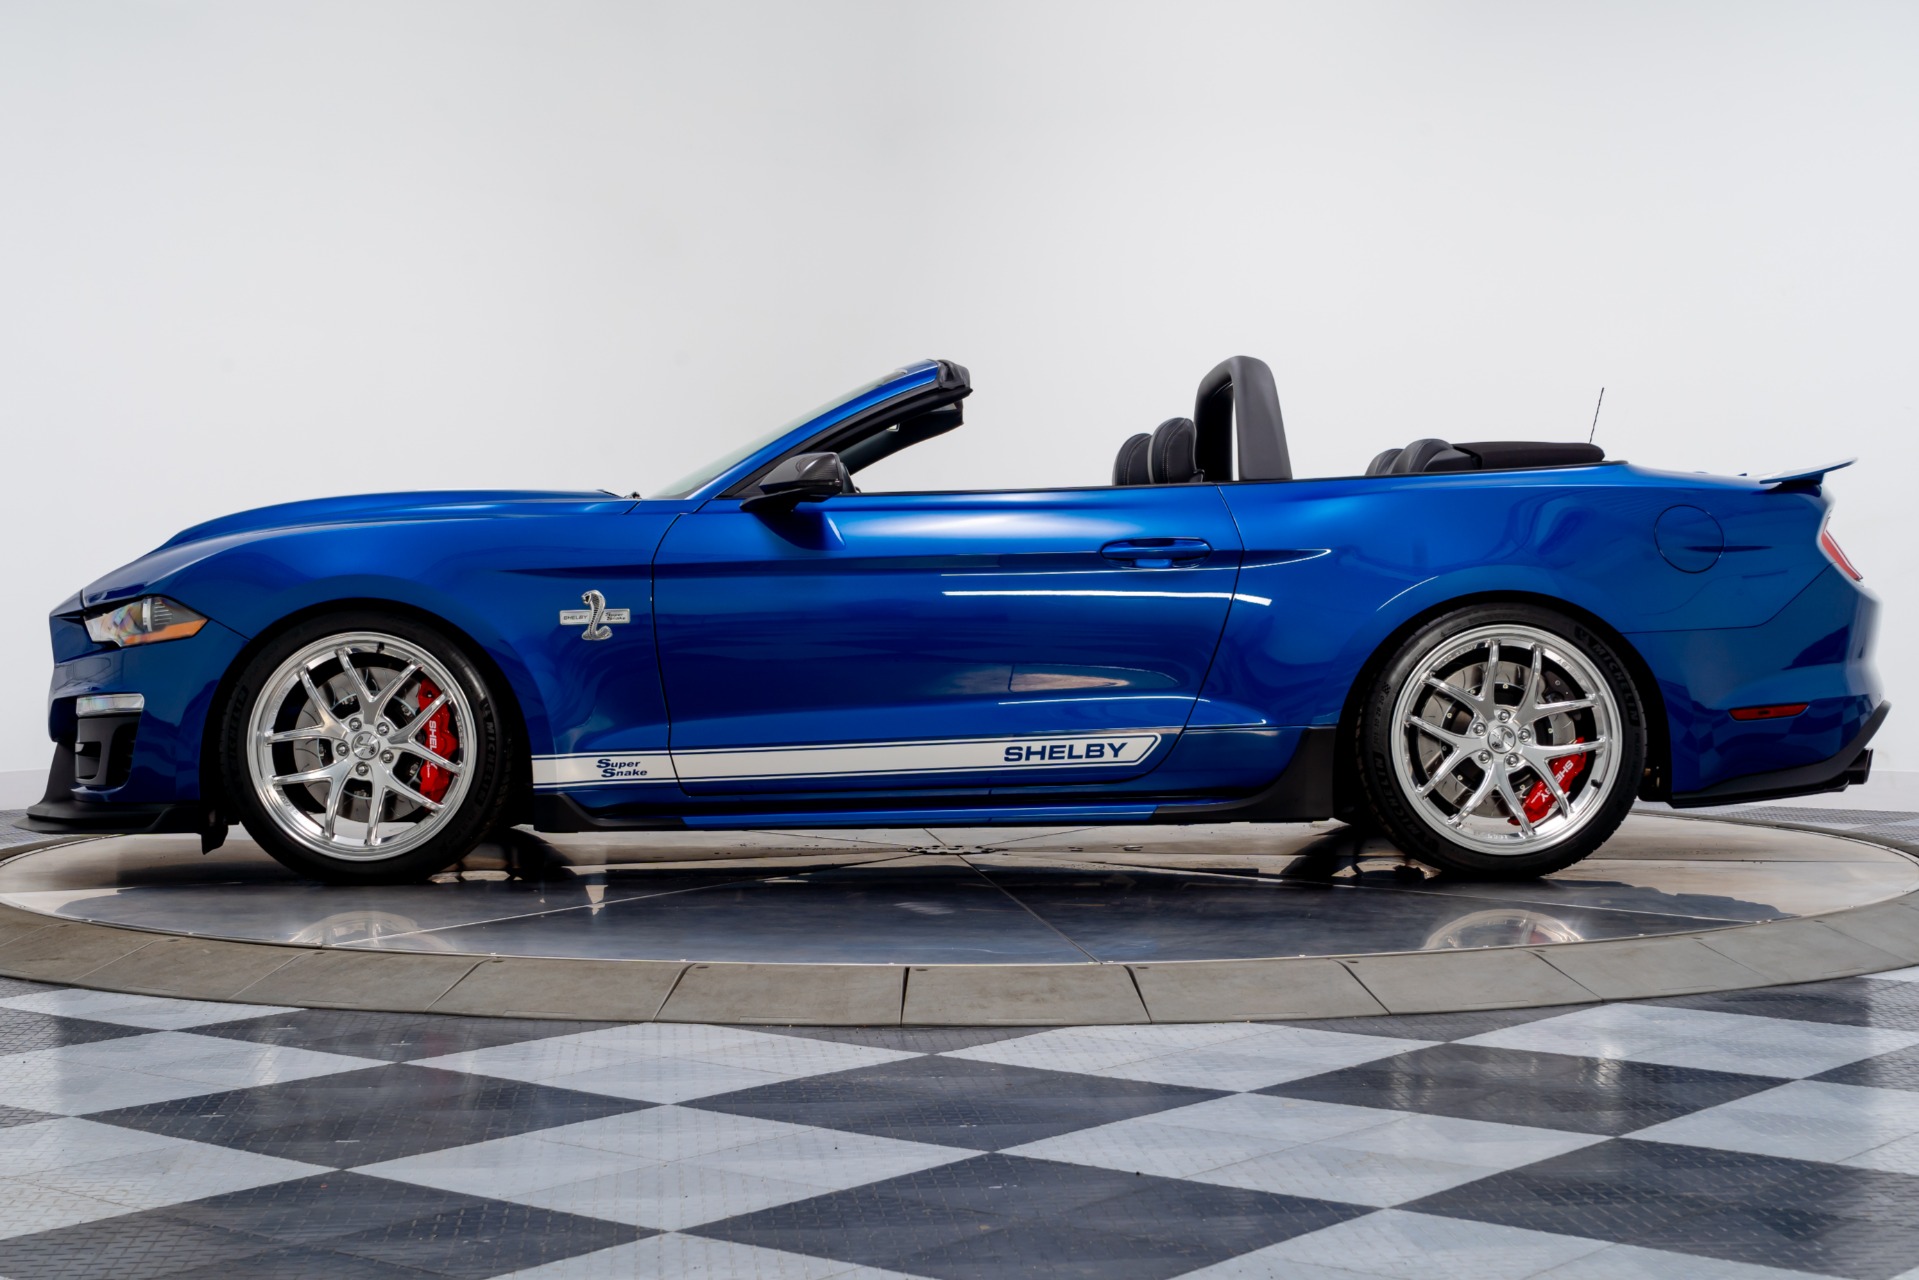 Used-2018-Ford-Mustang-Shelby-Super-Snake-Convertible-1600366106.jpg